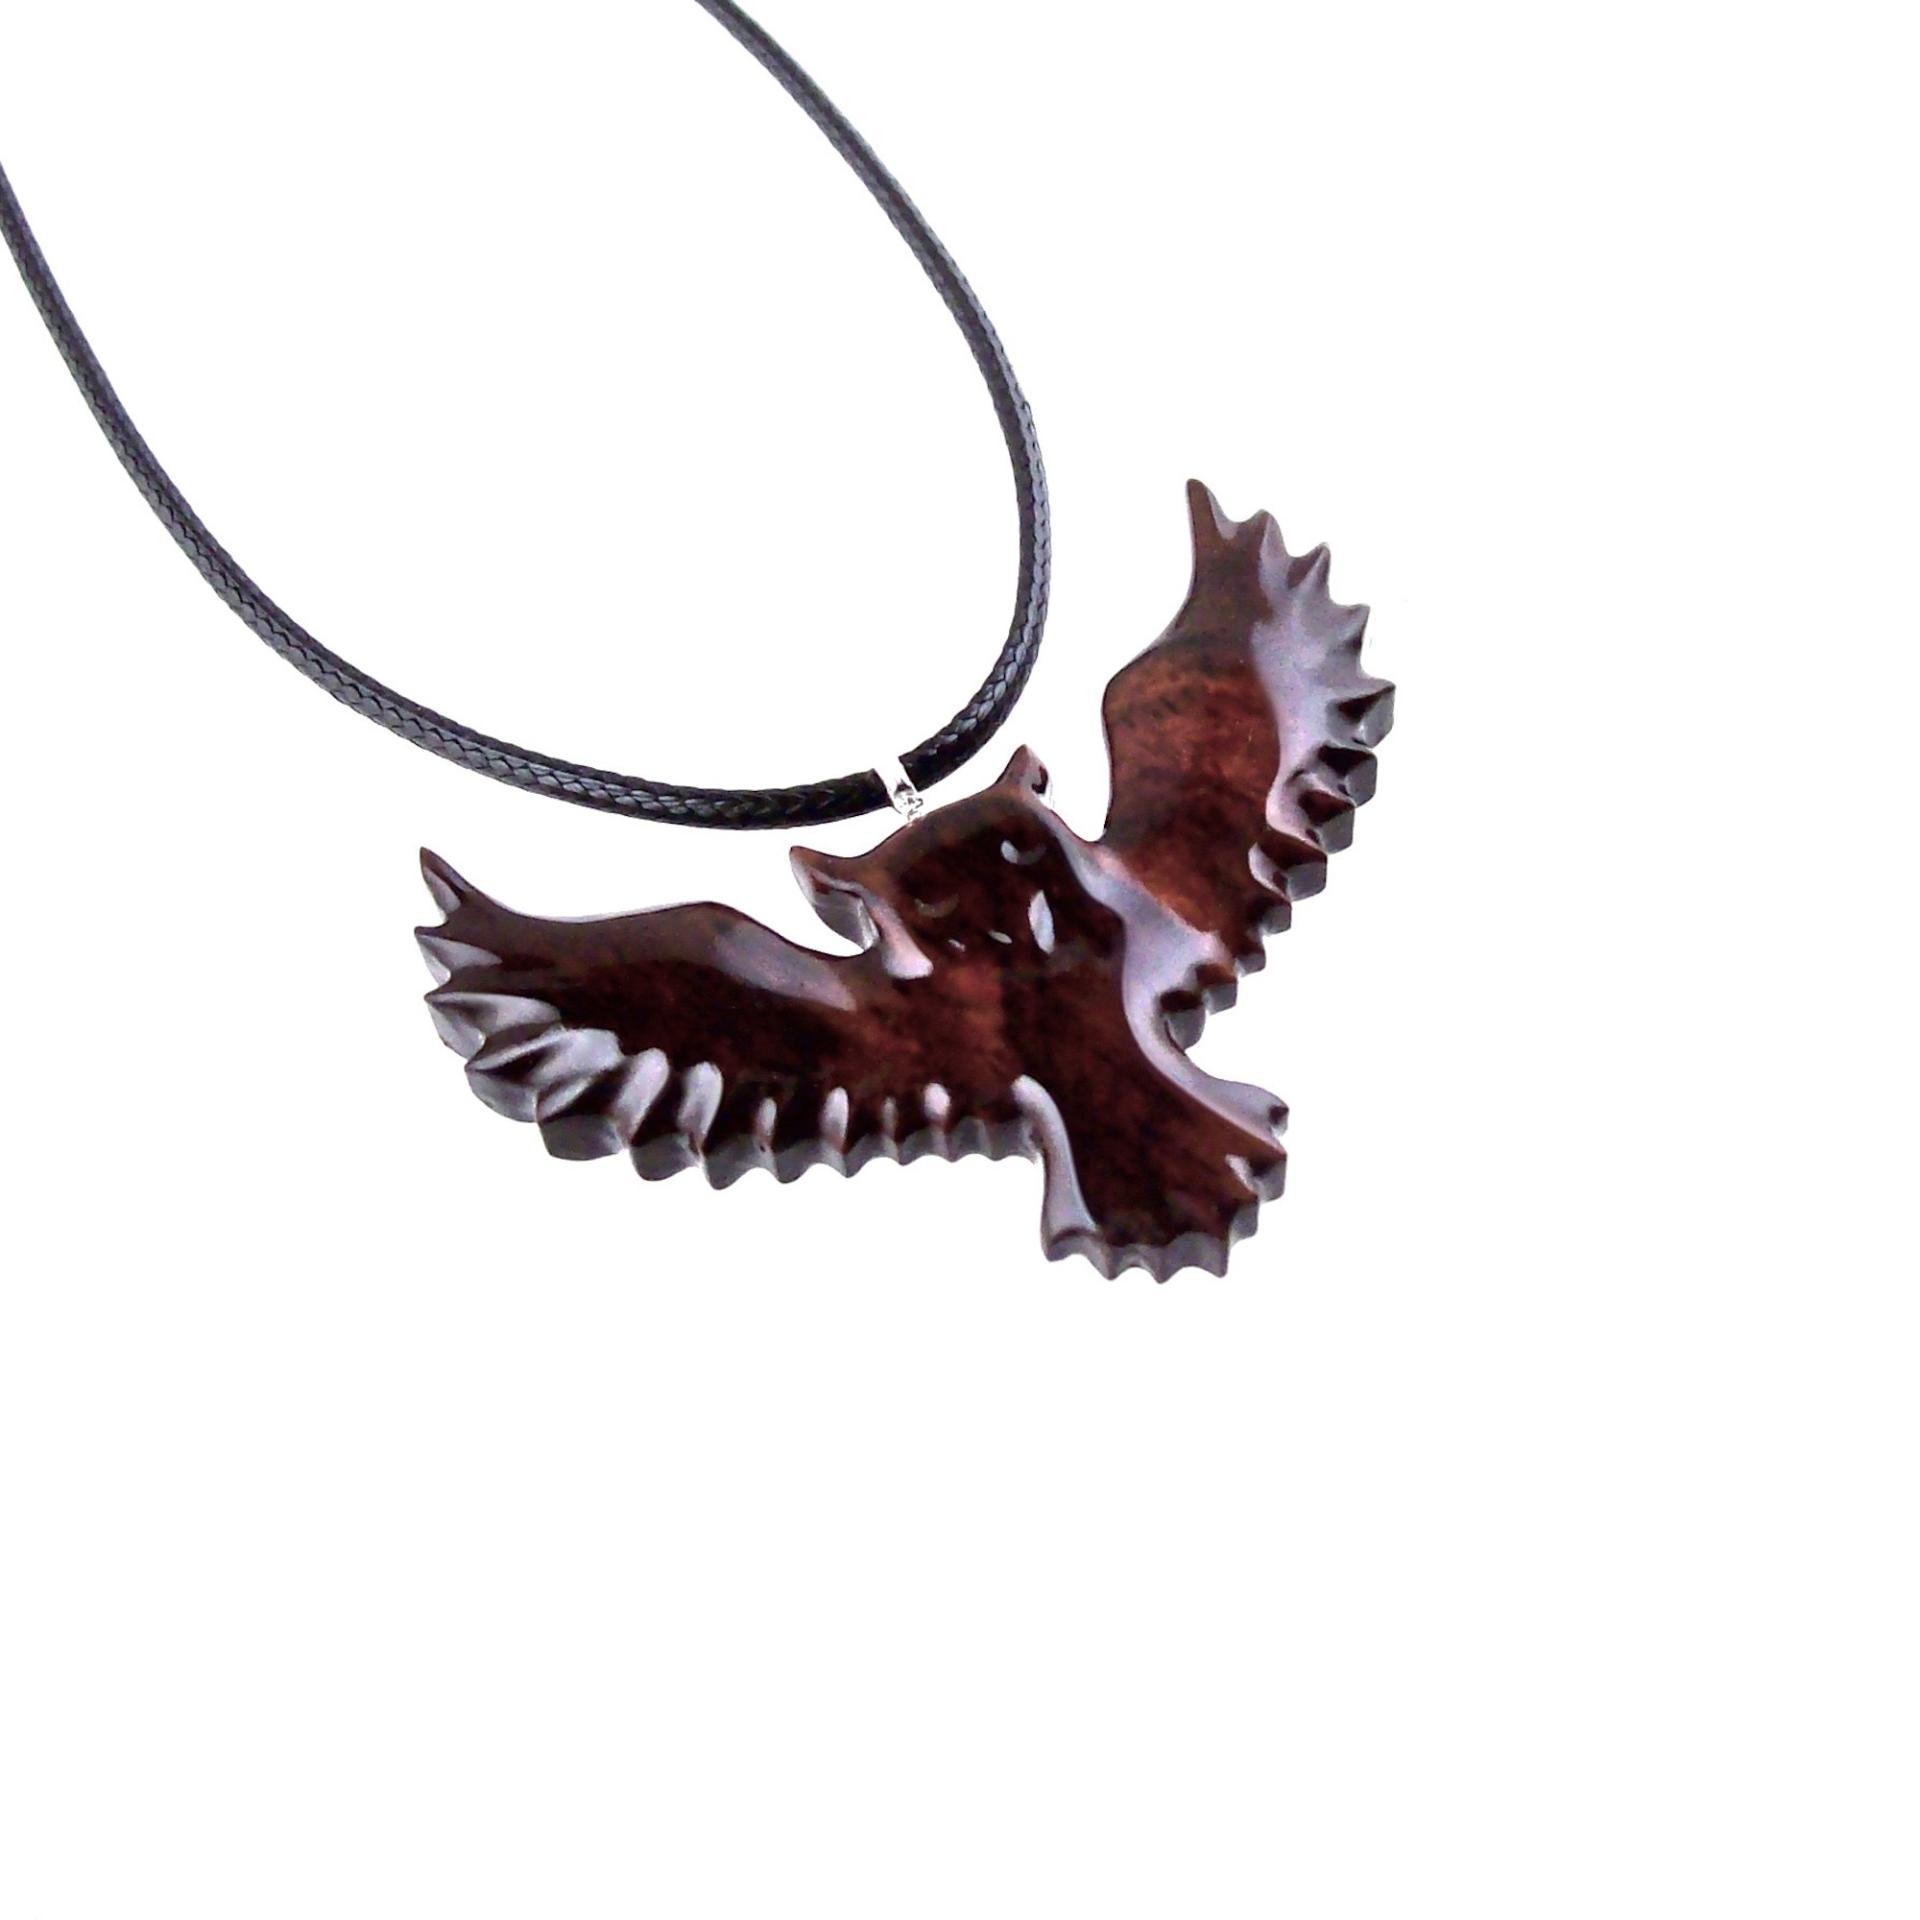 Owl Necklace, Hand Carved Wooden Owl Pendant, Flying Wood Bird Necklace for Men or Women, Totem Spirit Animal Jewelry